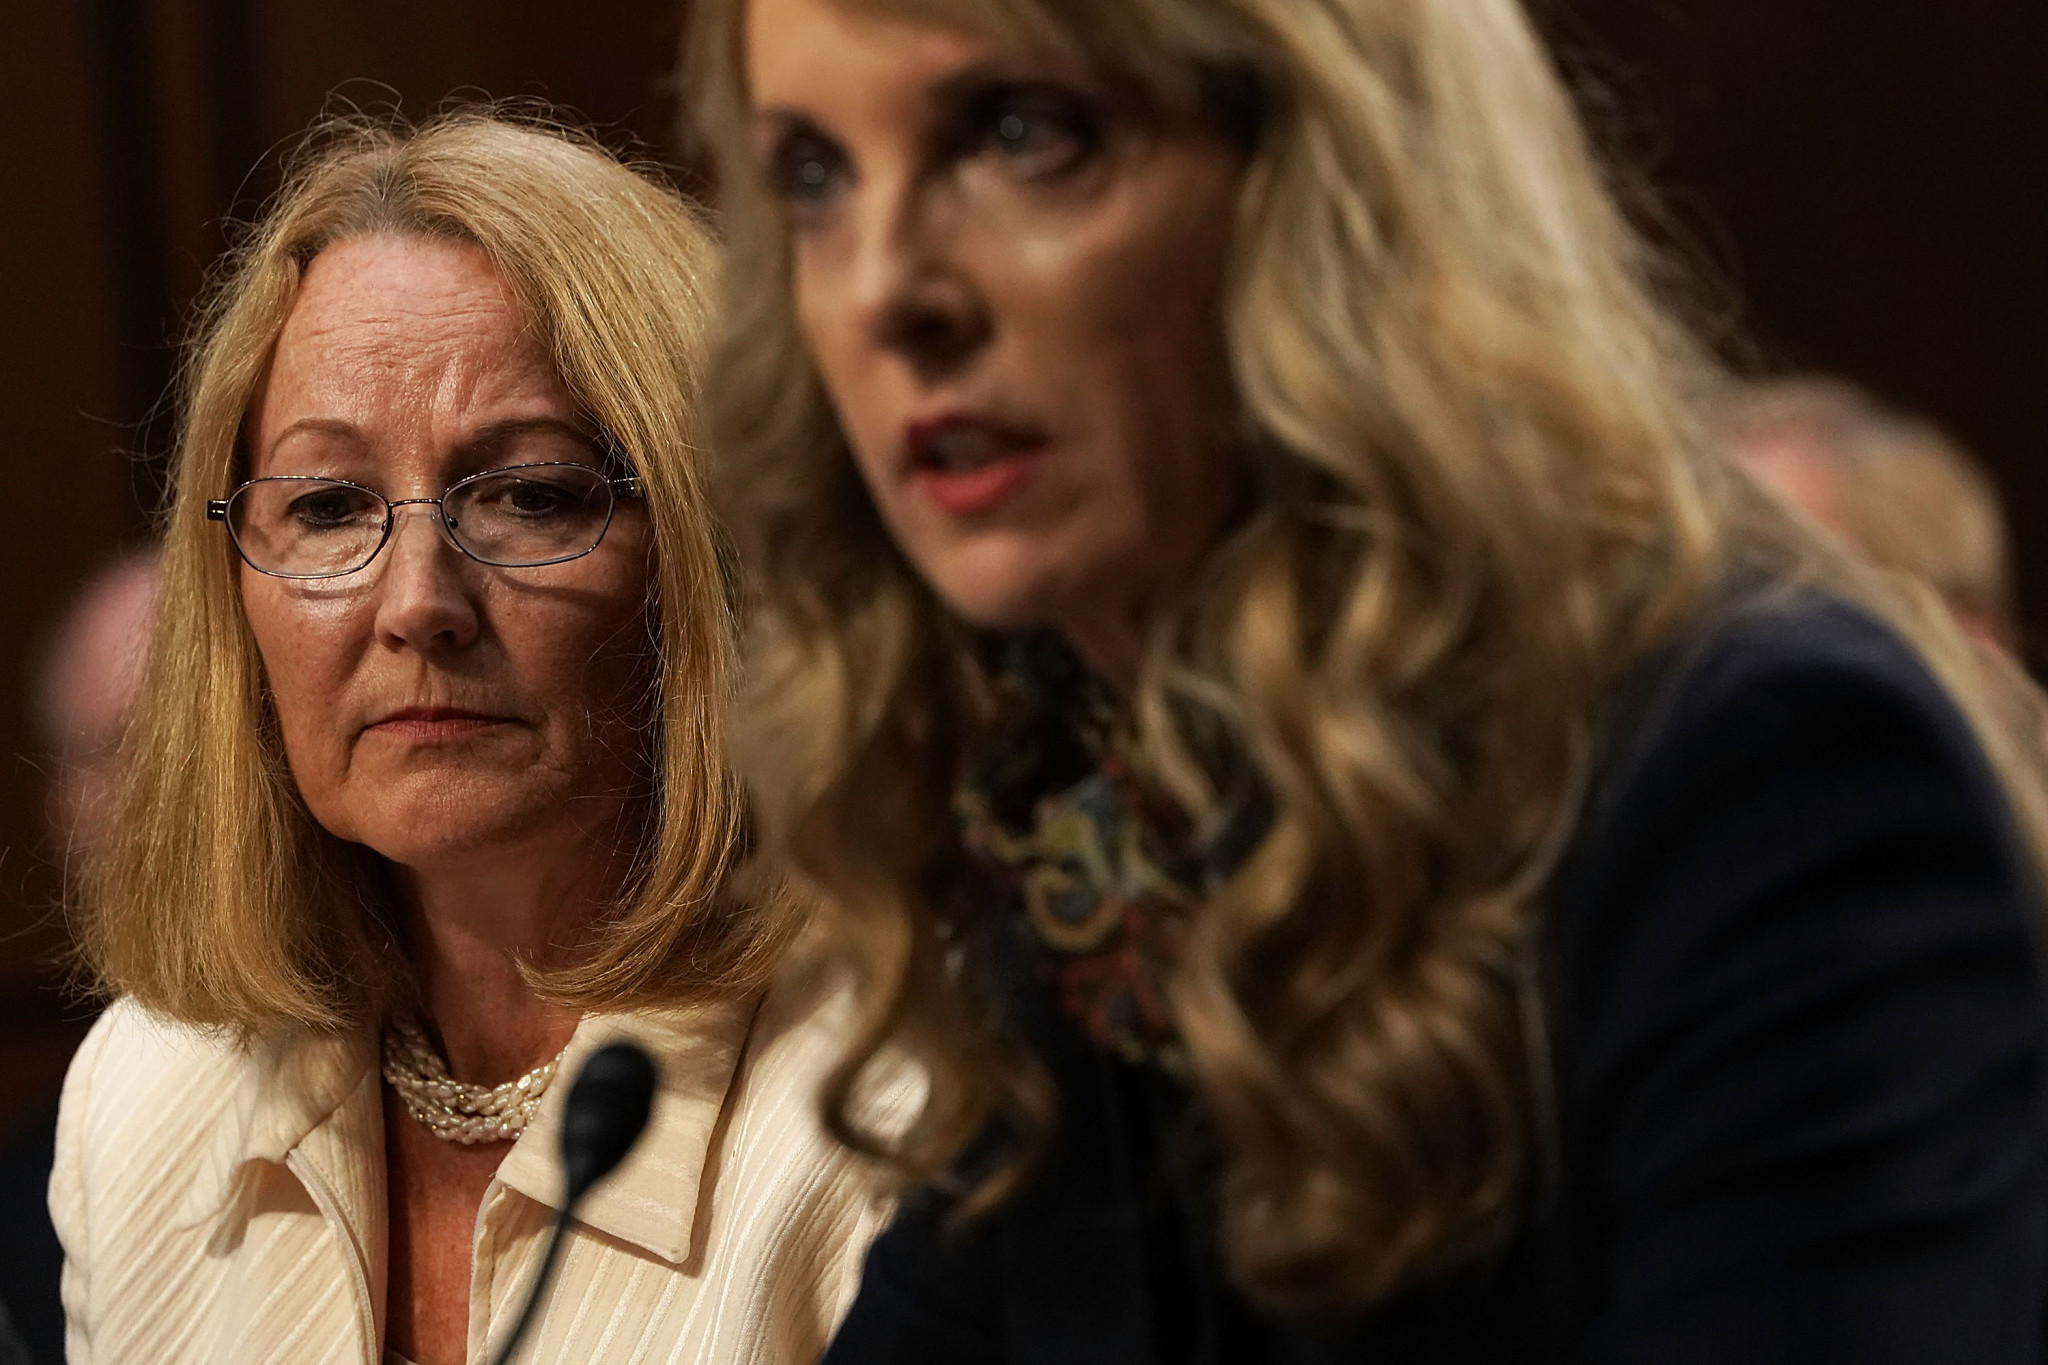 United States Olympic Committee chair Susanne Lyons, left, has claimed the body will not file for bankruptcy despite several lawsuits against it following the gymnastics scandal involving Larry Nassar ©Getty Images